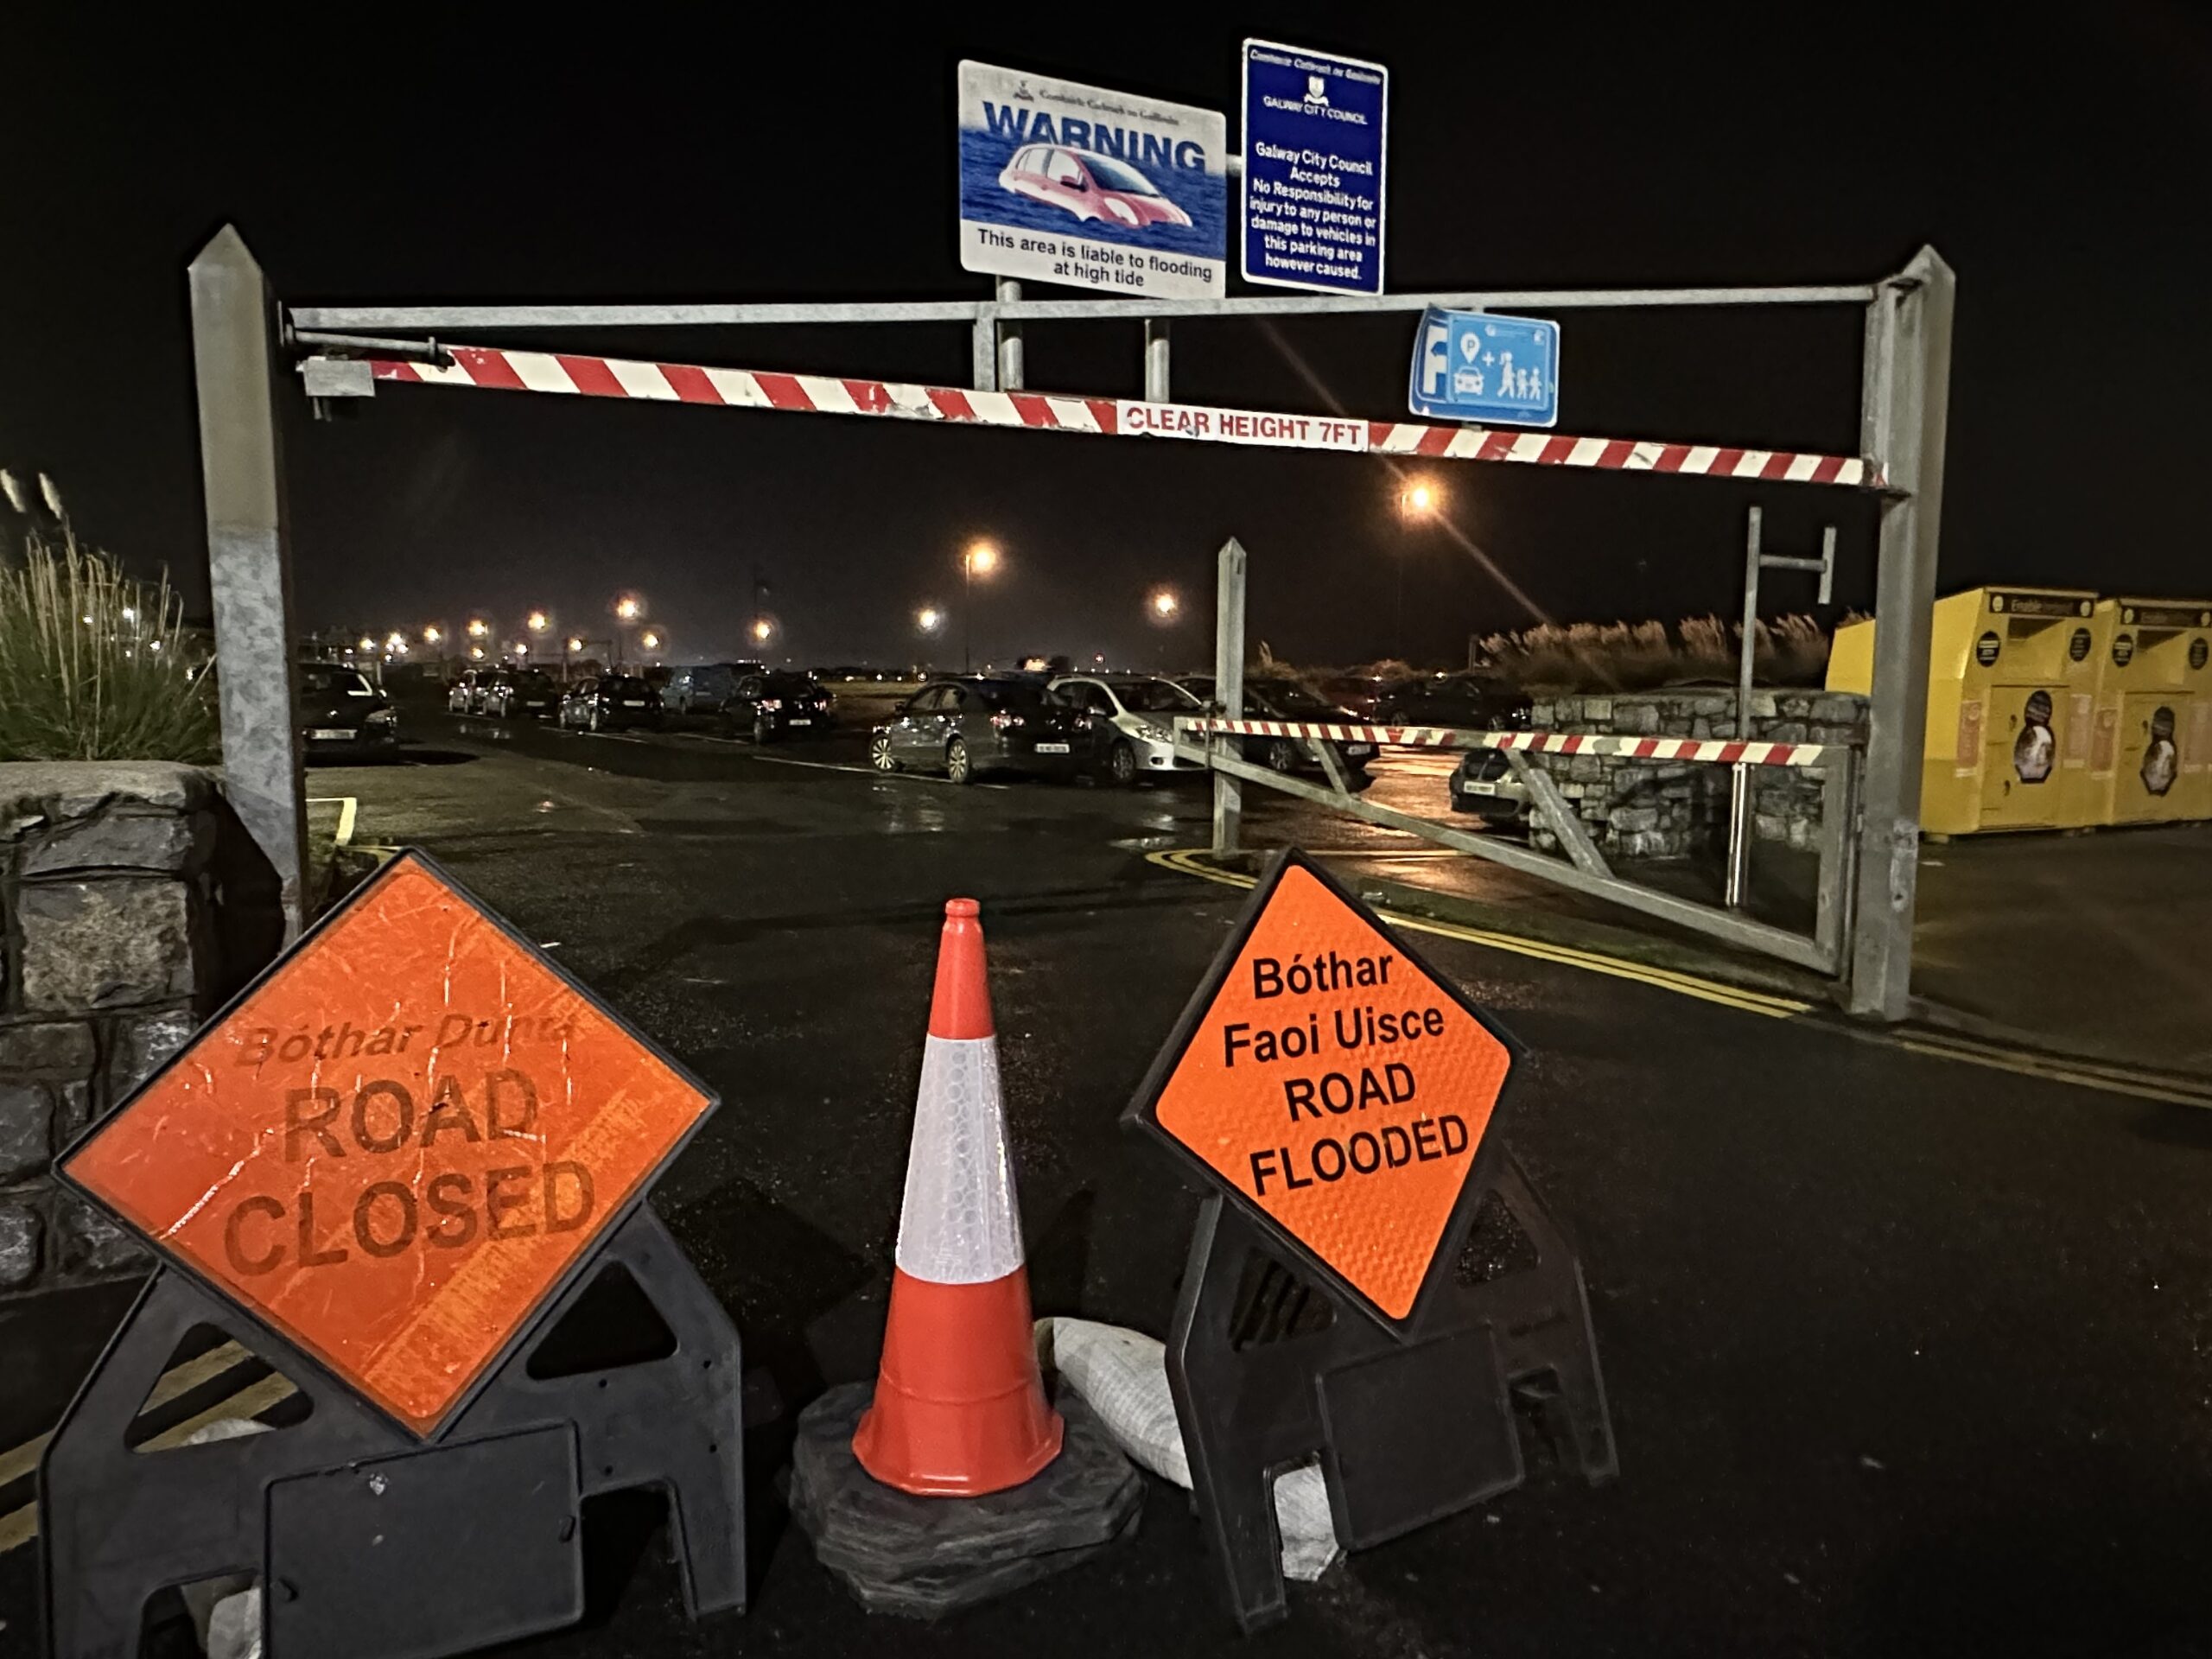 Motorists warned to move cars from Salthill carparks ahead of Storm Debi